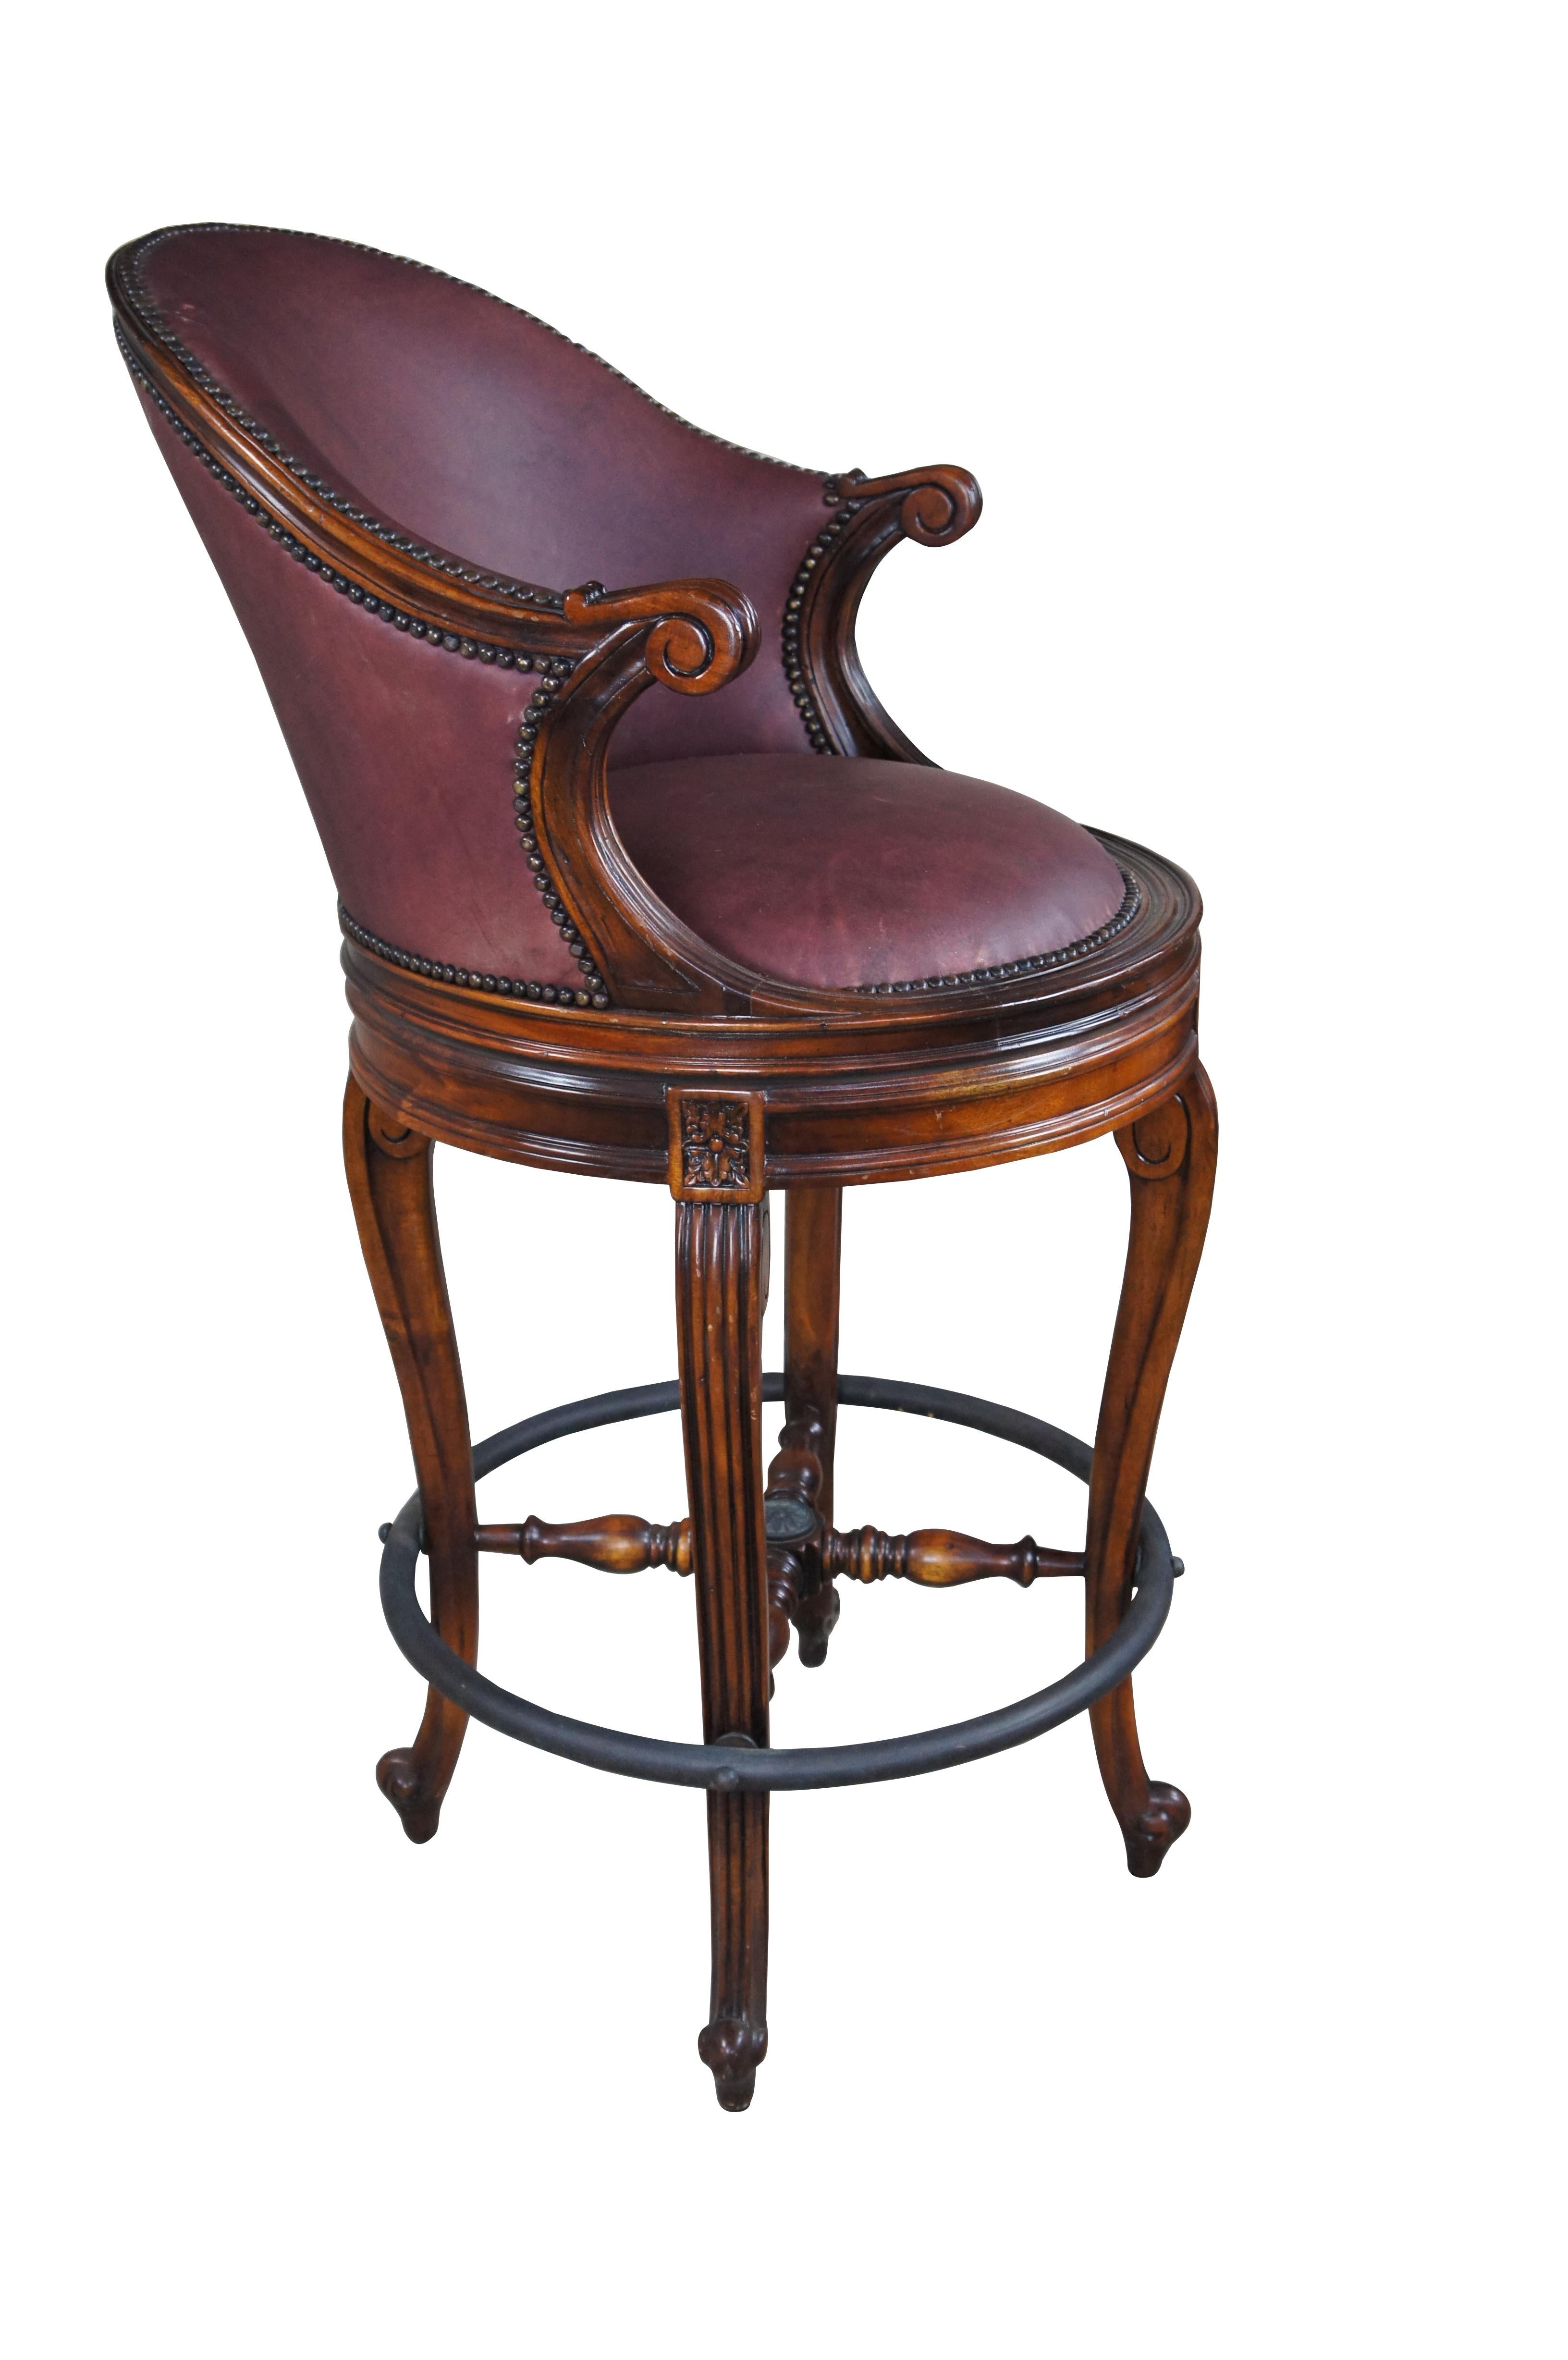 3 Theodore Alexander Napoleon III Mahogany Scoop Back Red Leather Bar Stool In Good Condition For Sale In Dayton, OH